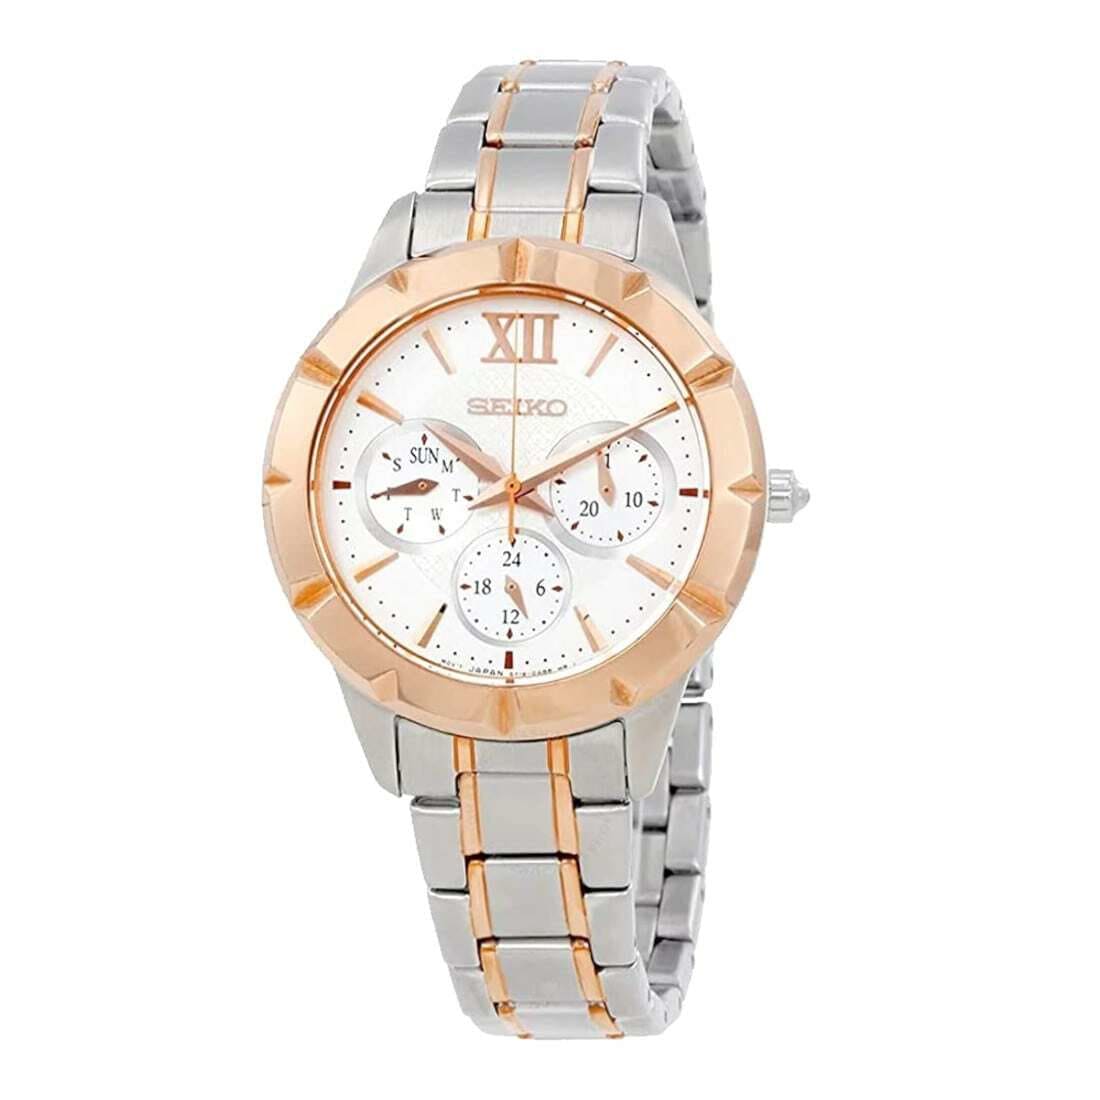 Seiko SKY692 Two Tone Rosegold Stainless White Dial Multi-Function Watch 4954628172648